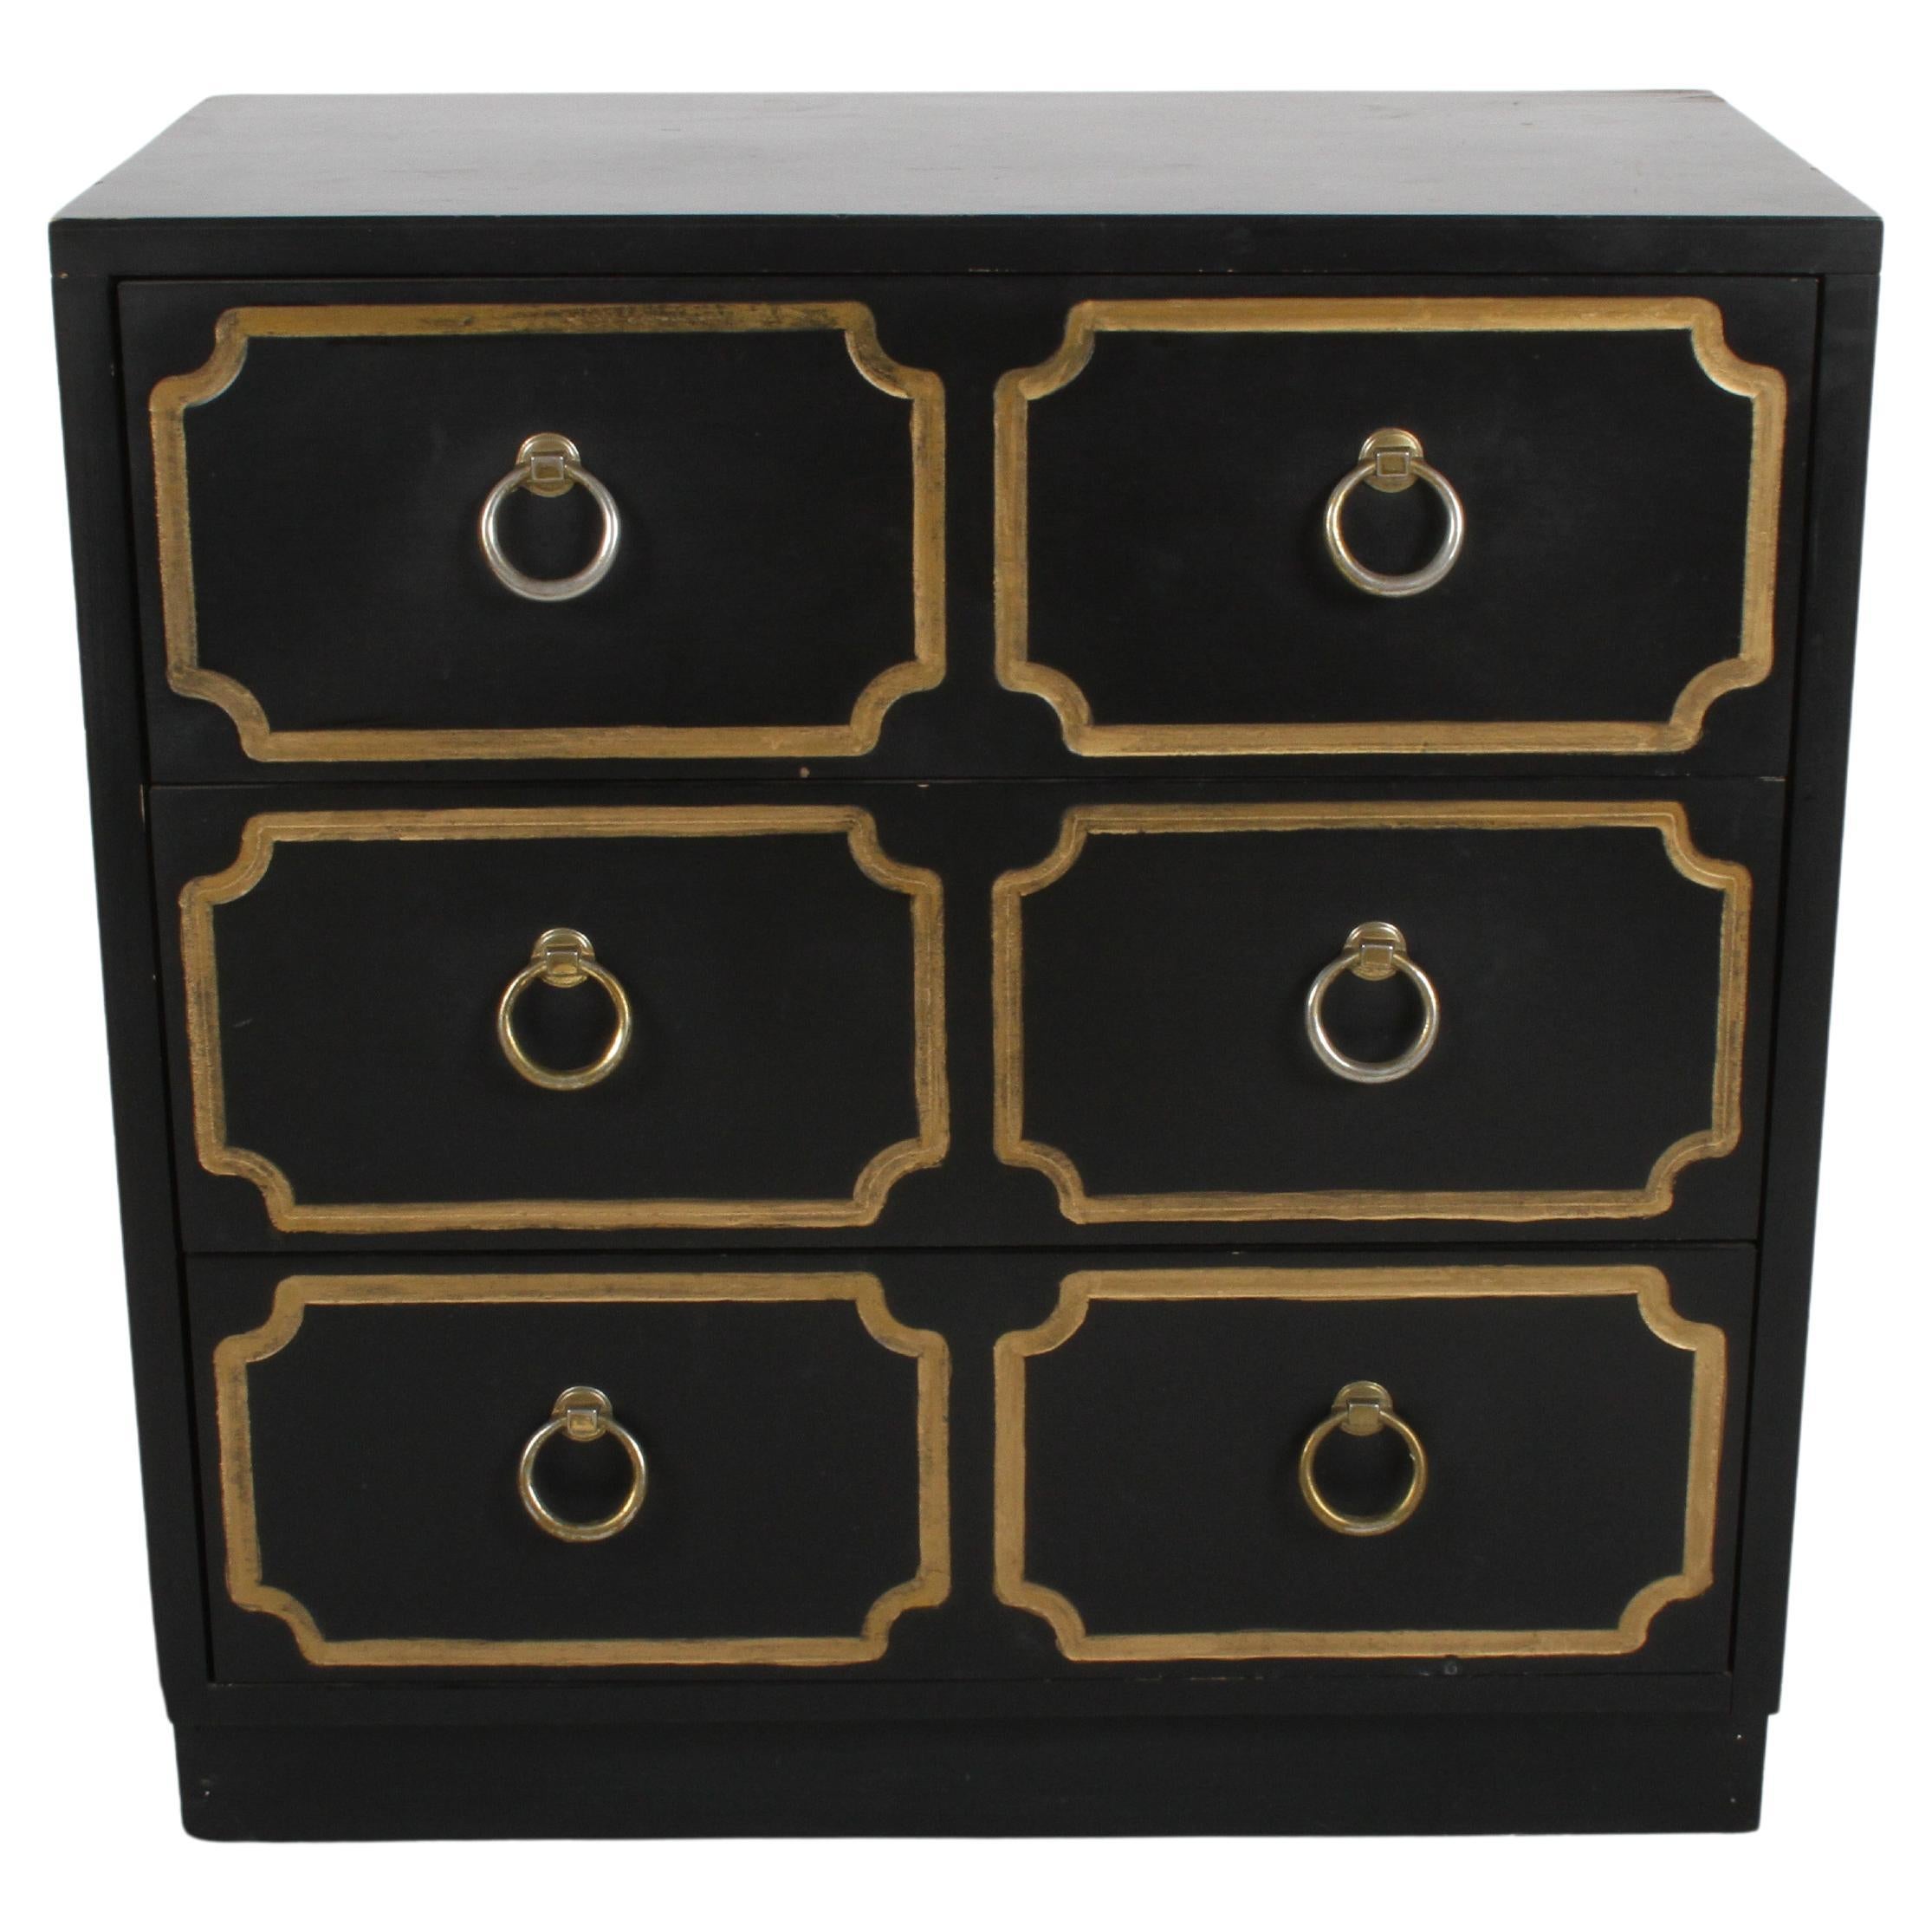 Dorothy Draper Style "España" Group Black & Gold Cabinet, Dresser or Night Stand